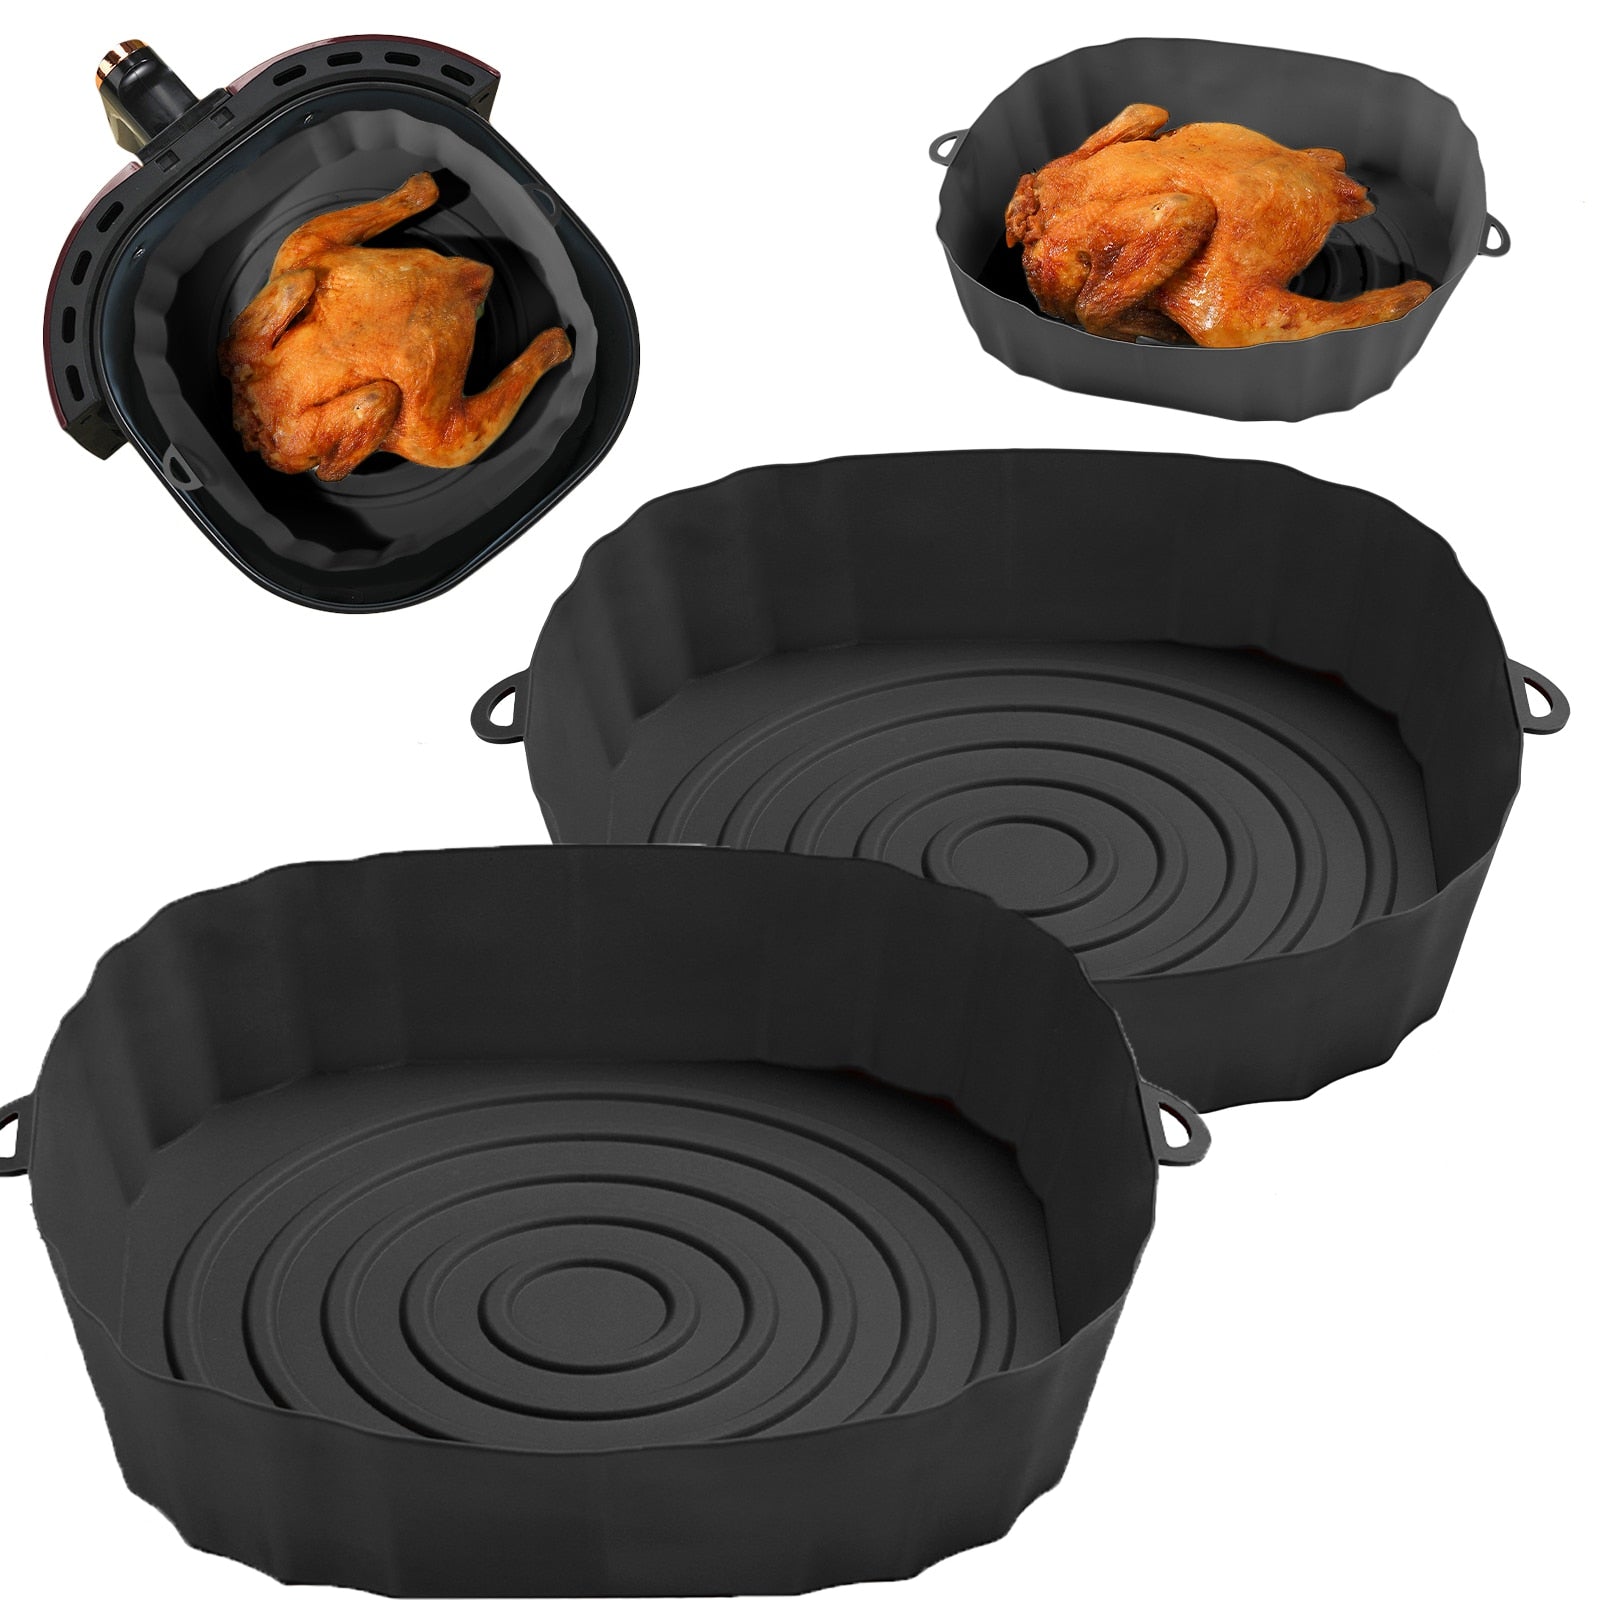 Re-Kitch.™ Air Fryer Silicone Baking Mold Oven & Glove Tray Set